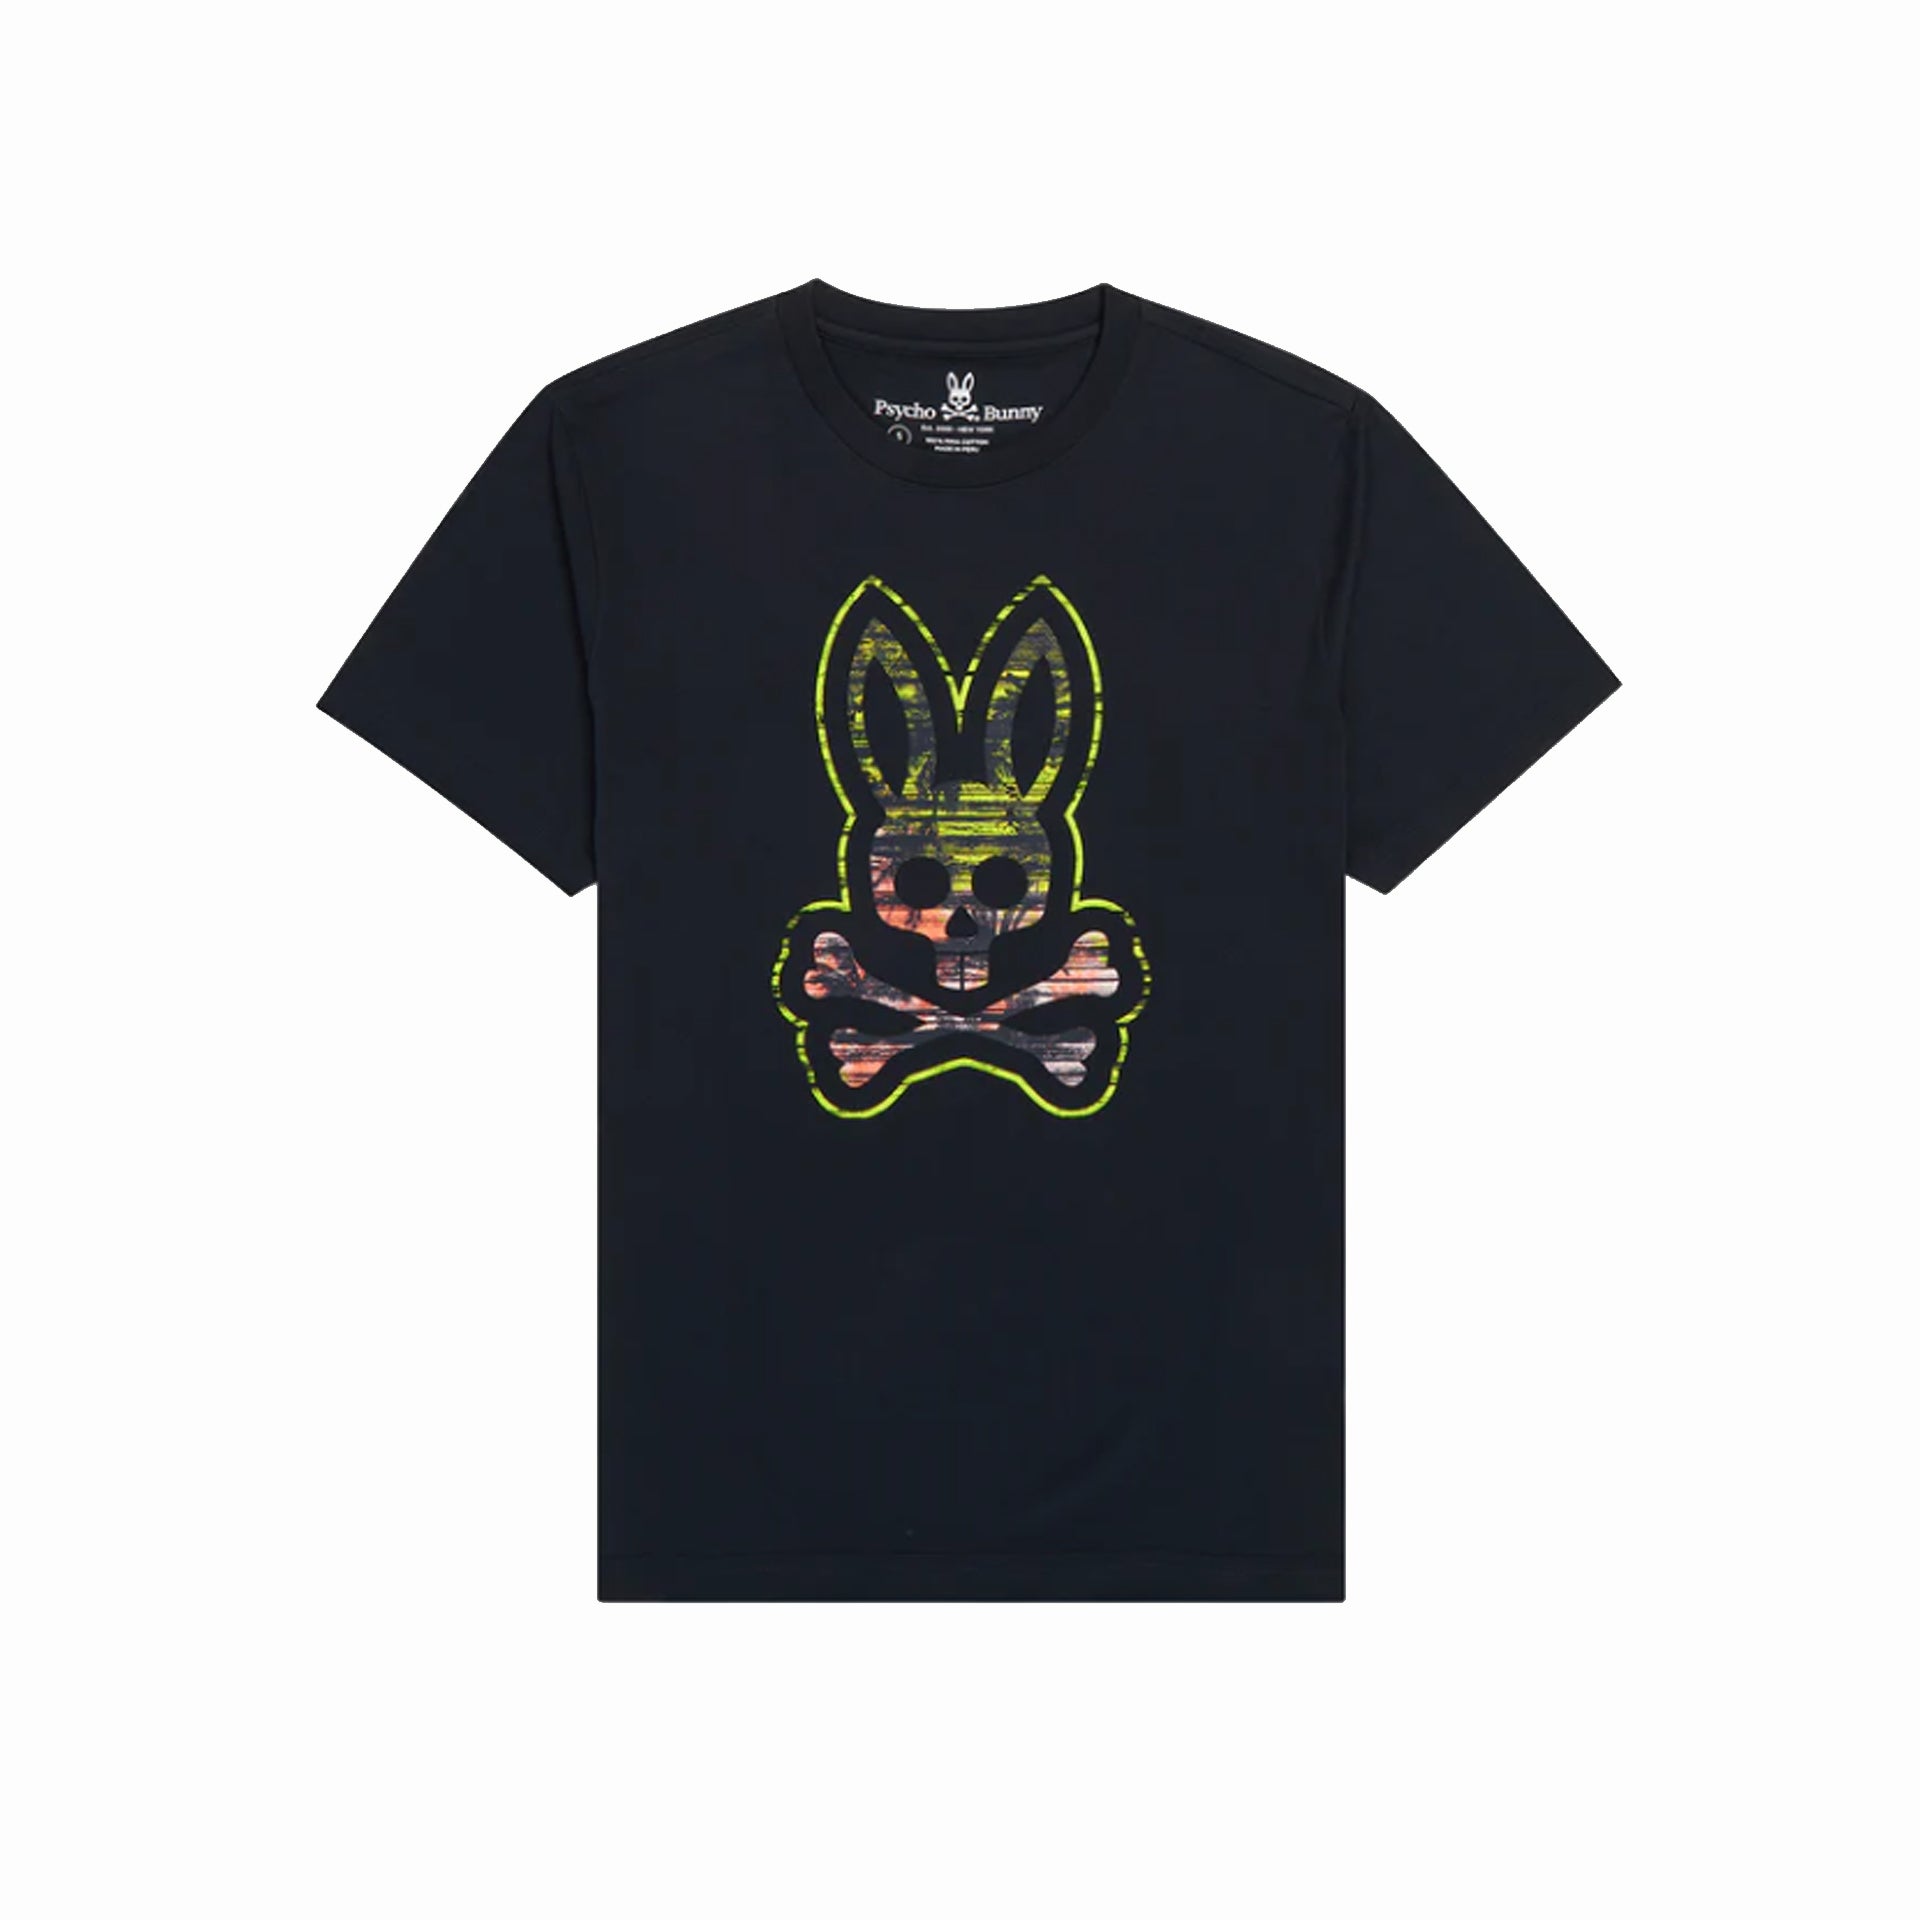 MENS NORBY GRAPHIC Navy Tshirt